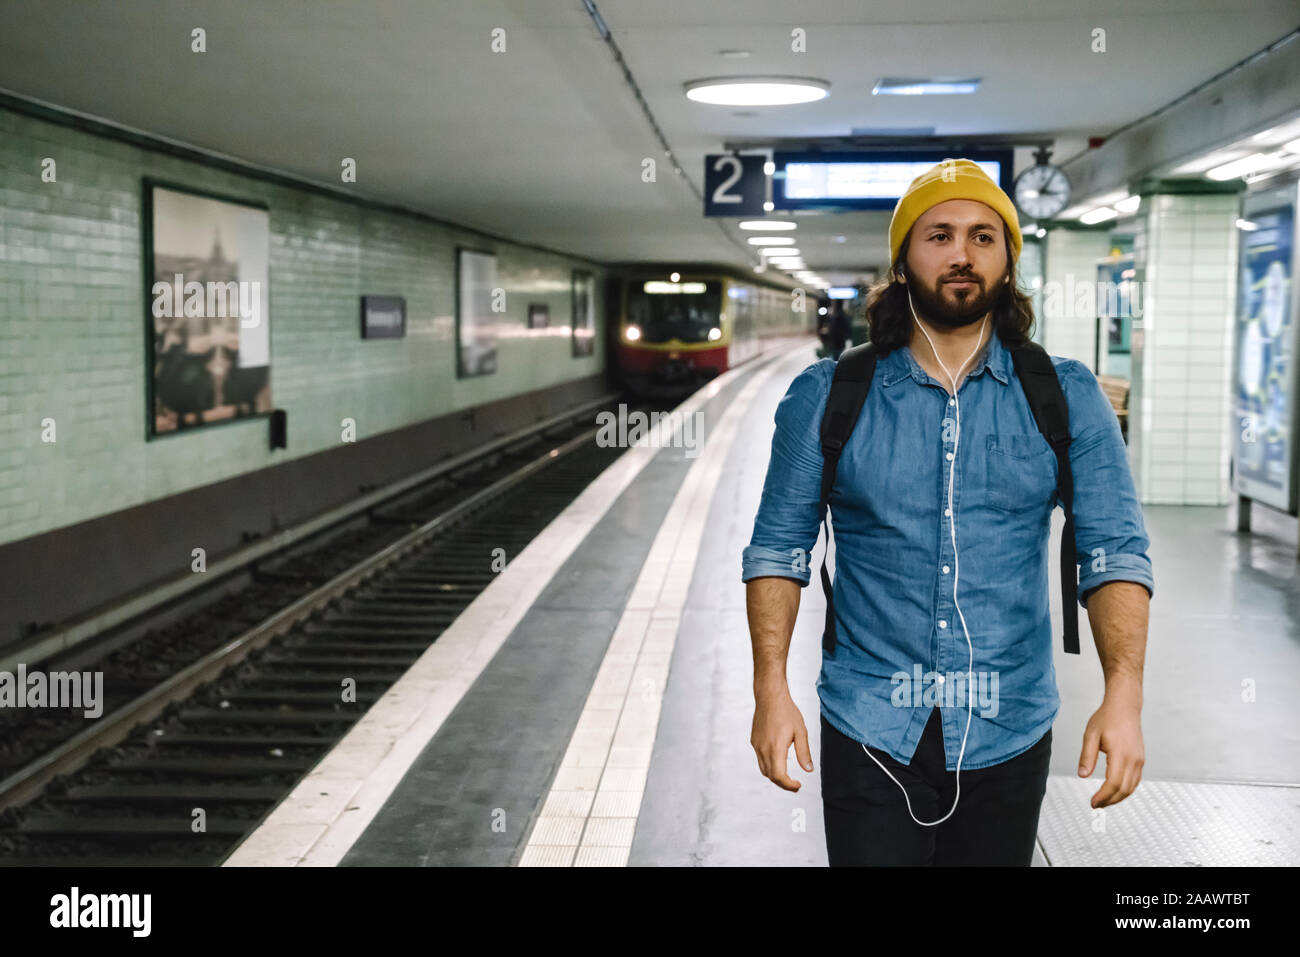 Portrait of man with backpack and earphones walking at platform, Berlin, Germany Stock Photo